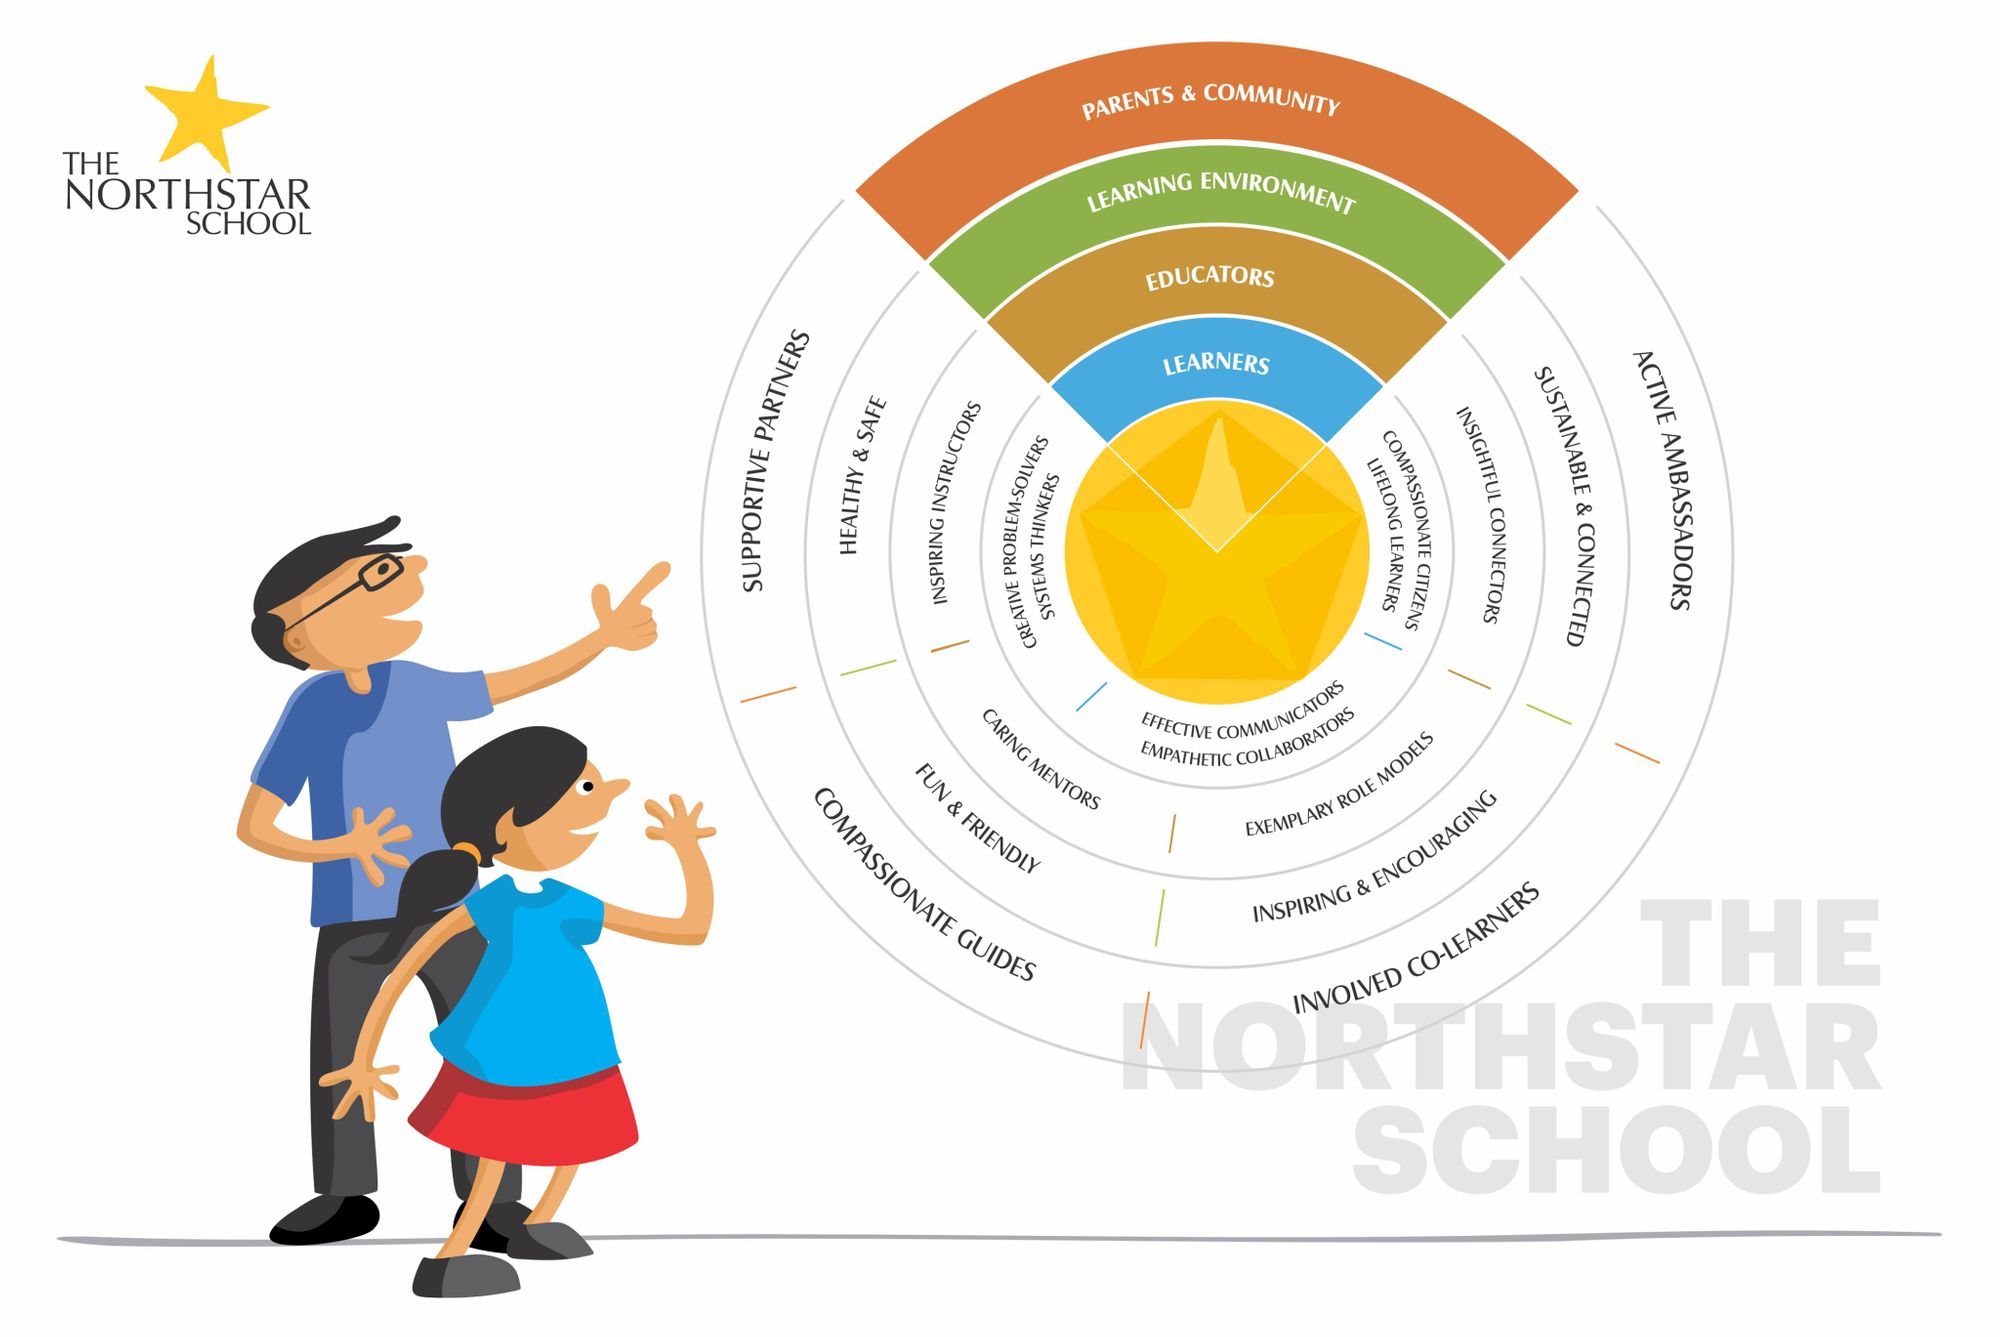 Northstar Approach to Online Learning